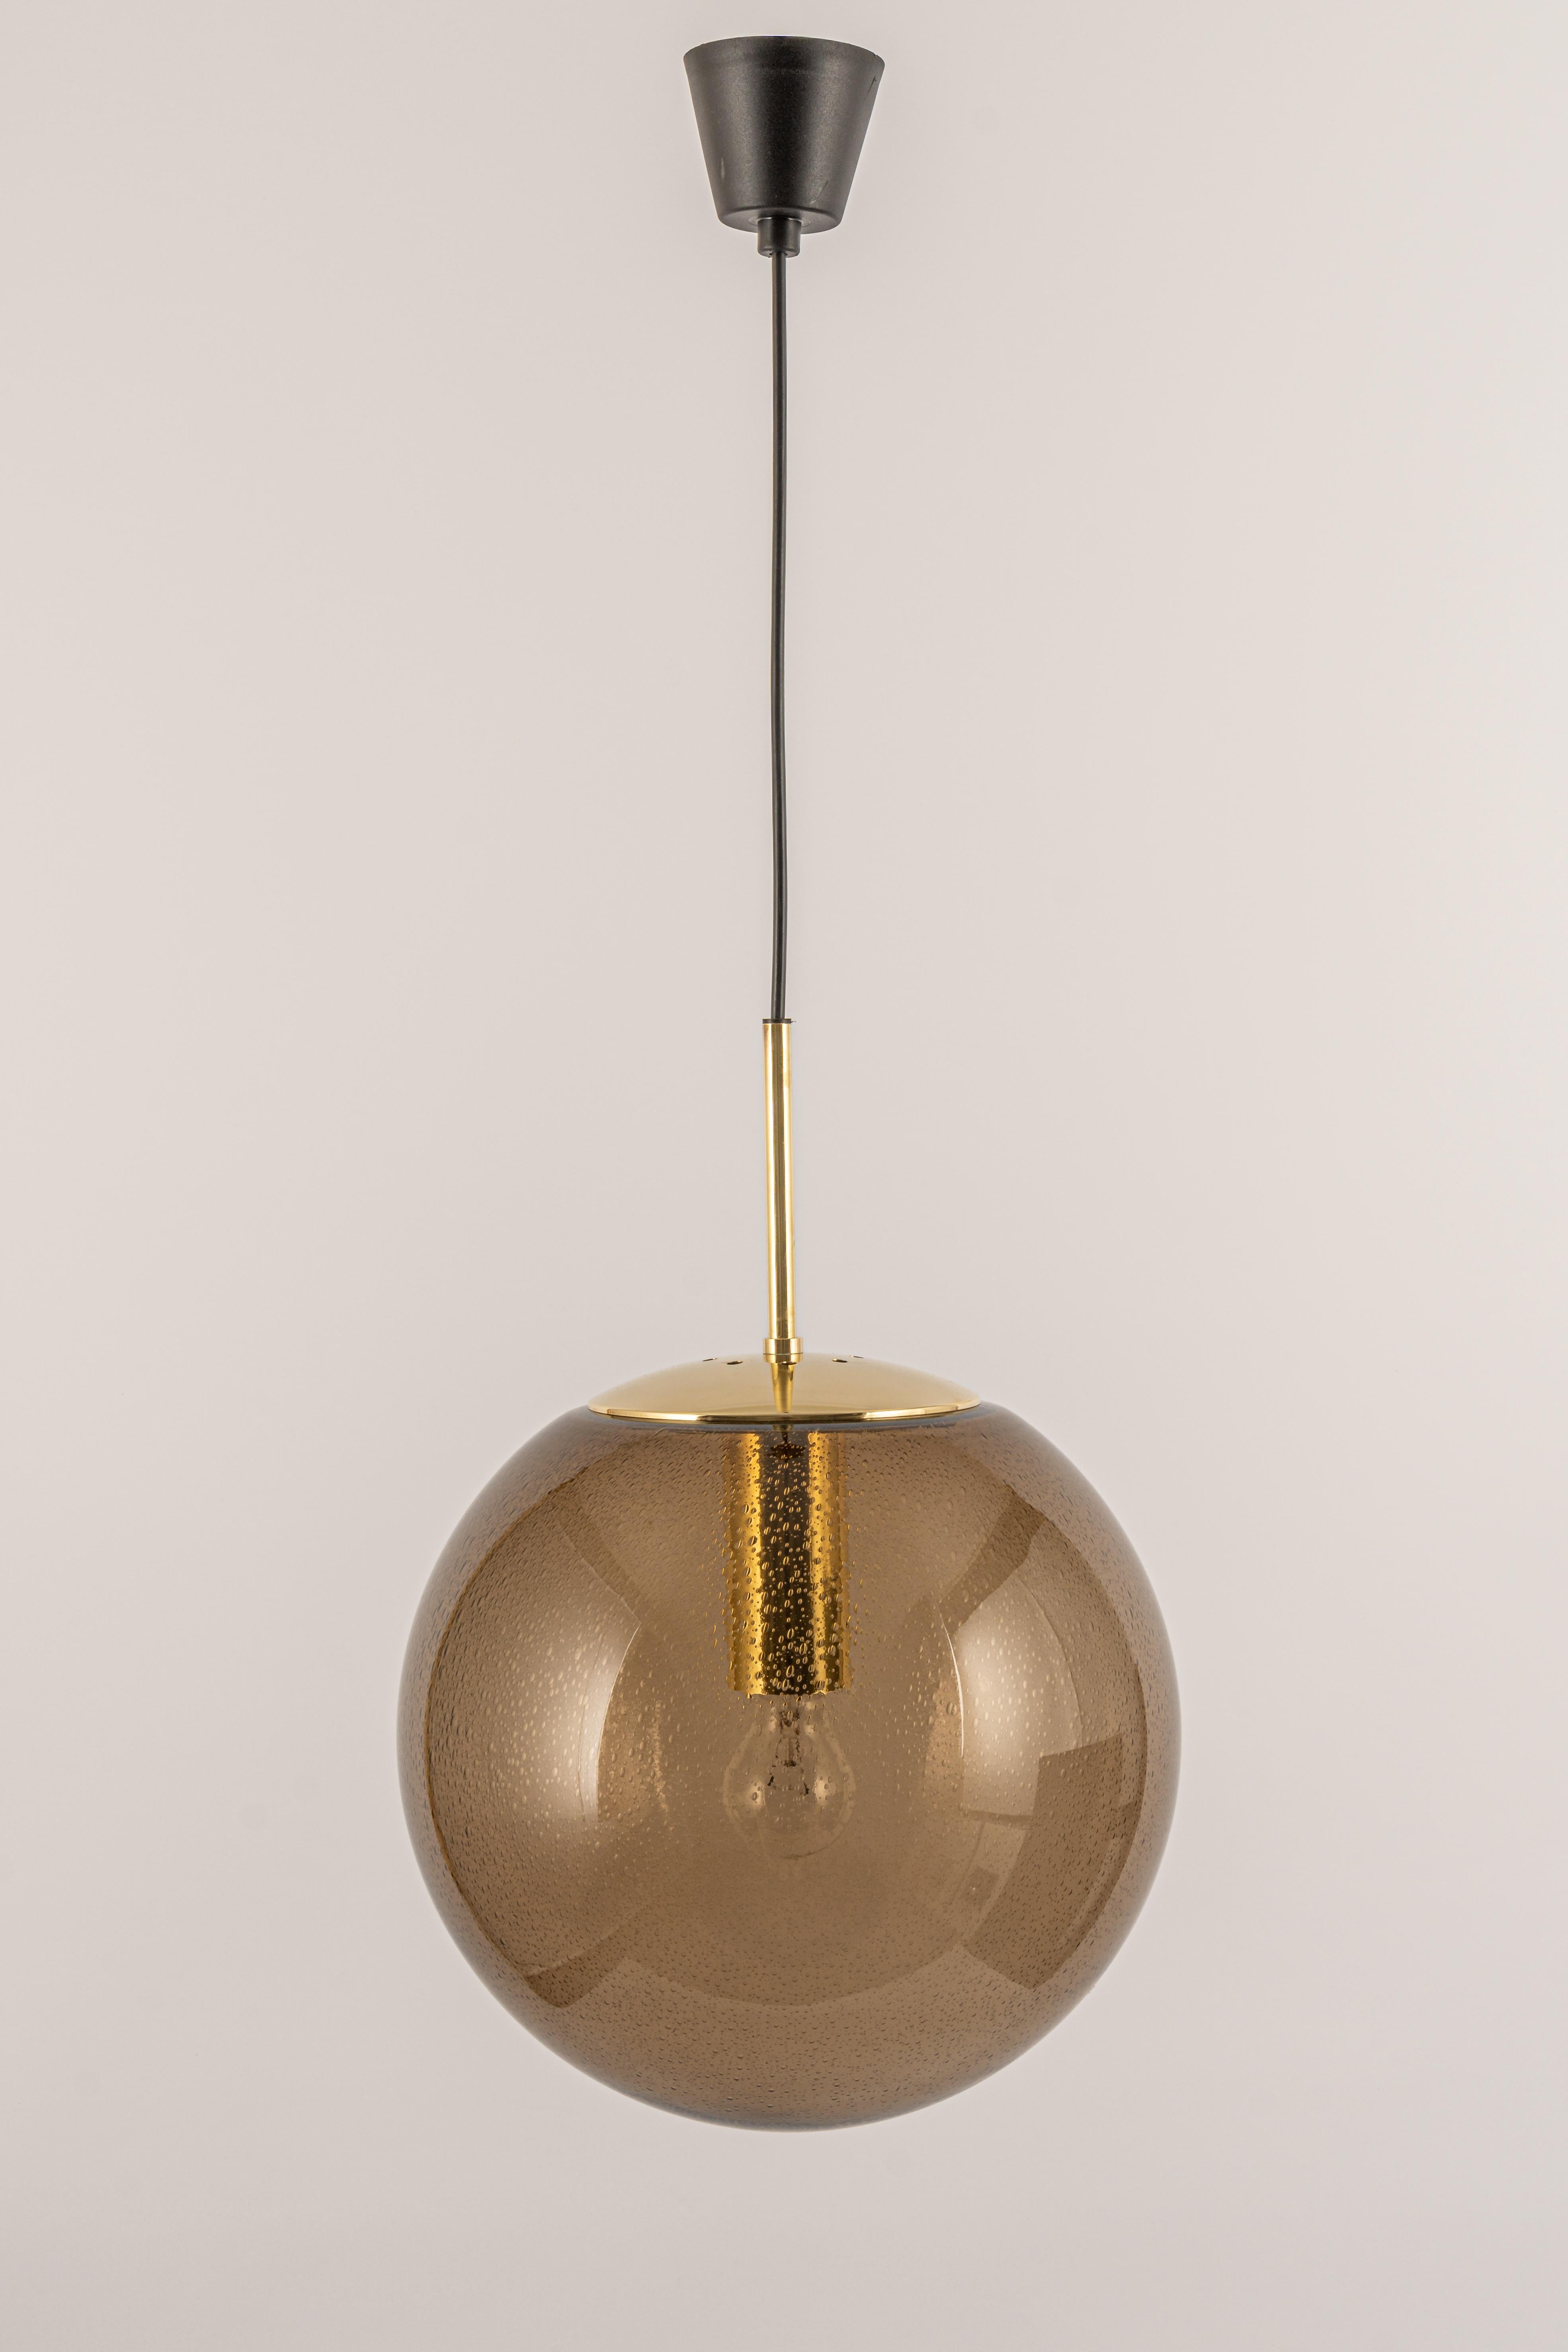 Large smoked glass ball (hand-made) pendant, manufactured by Limburg, Germany, circa 1970-1979.

Sockets: 1 x E27 Standard bulbs.
Light bulbs are not included. It is possible to install this fixture in all countries (US, UK, Europe, Asia,